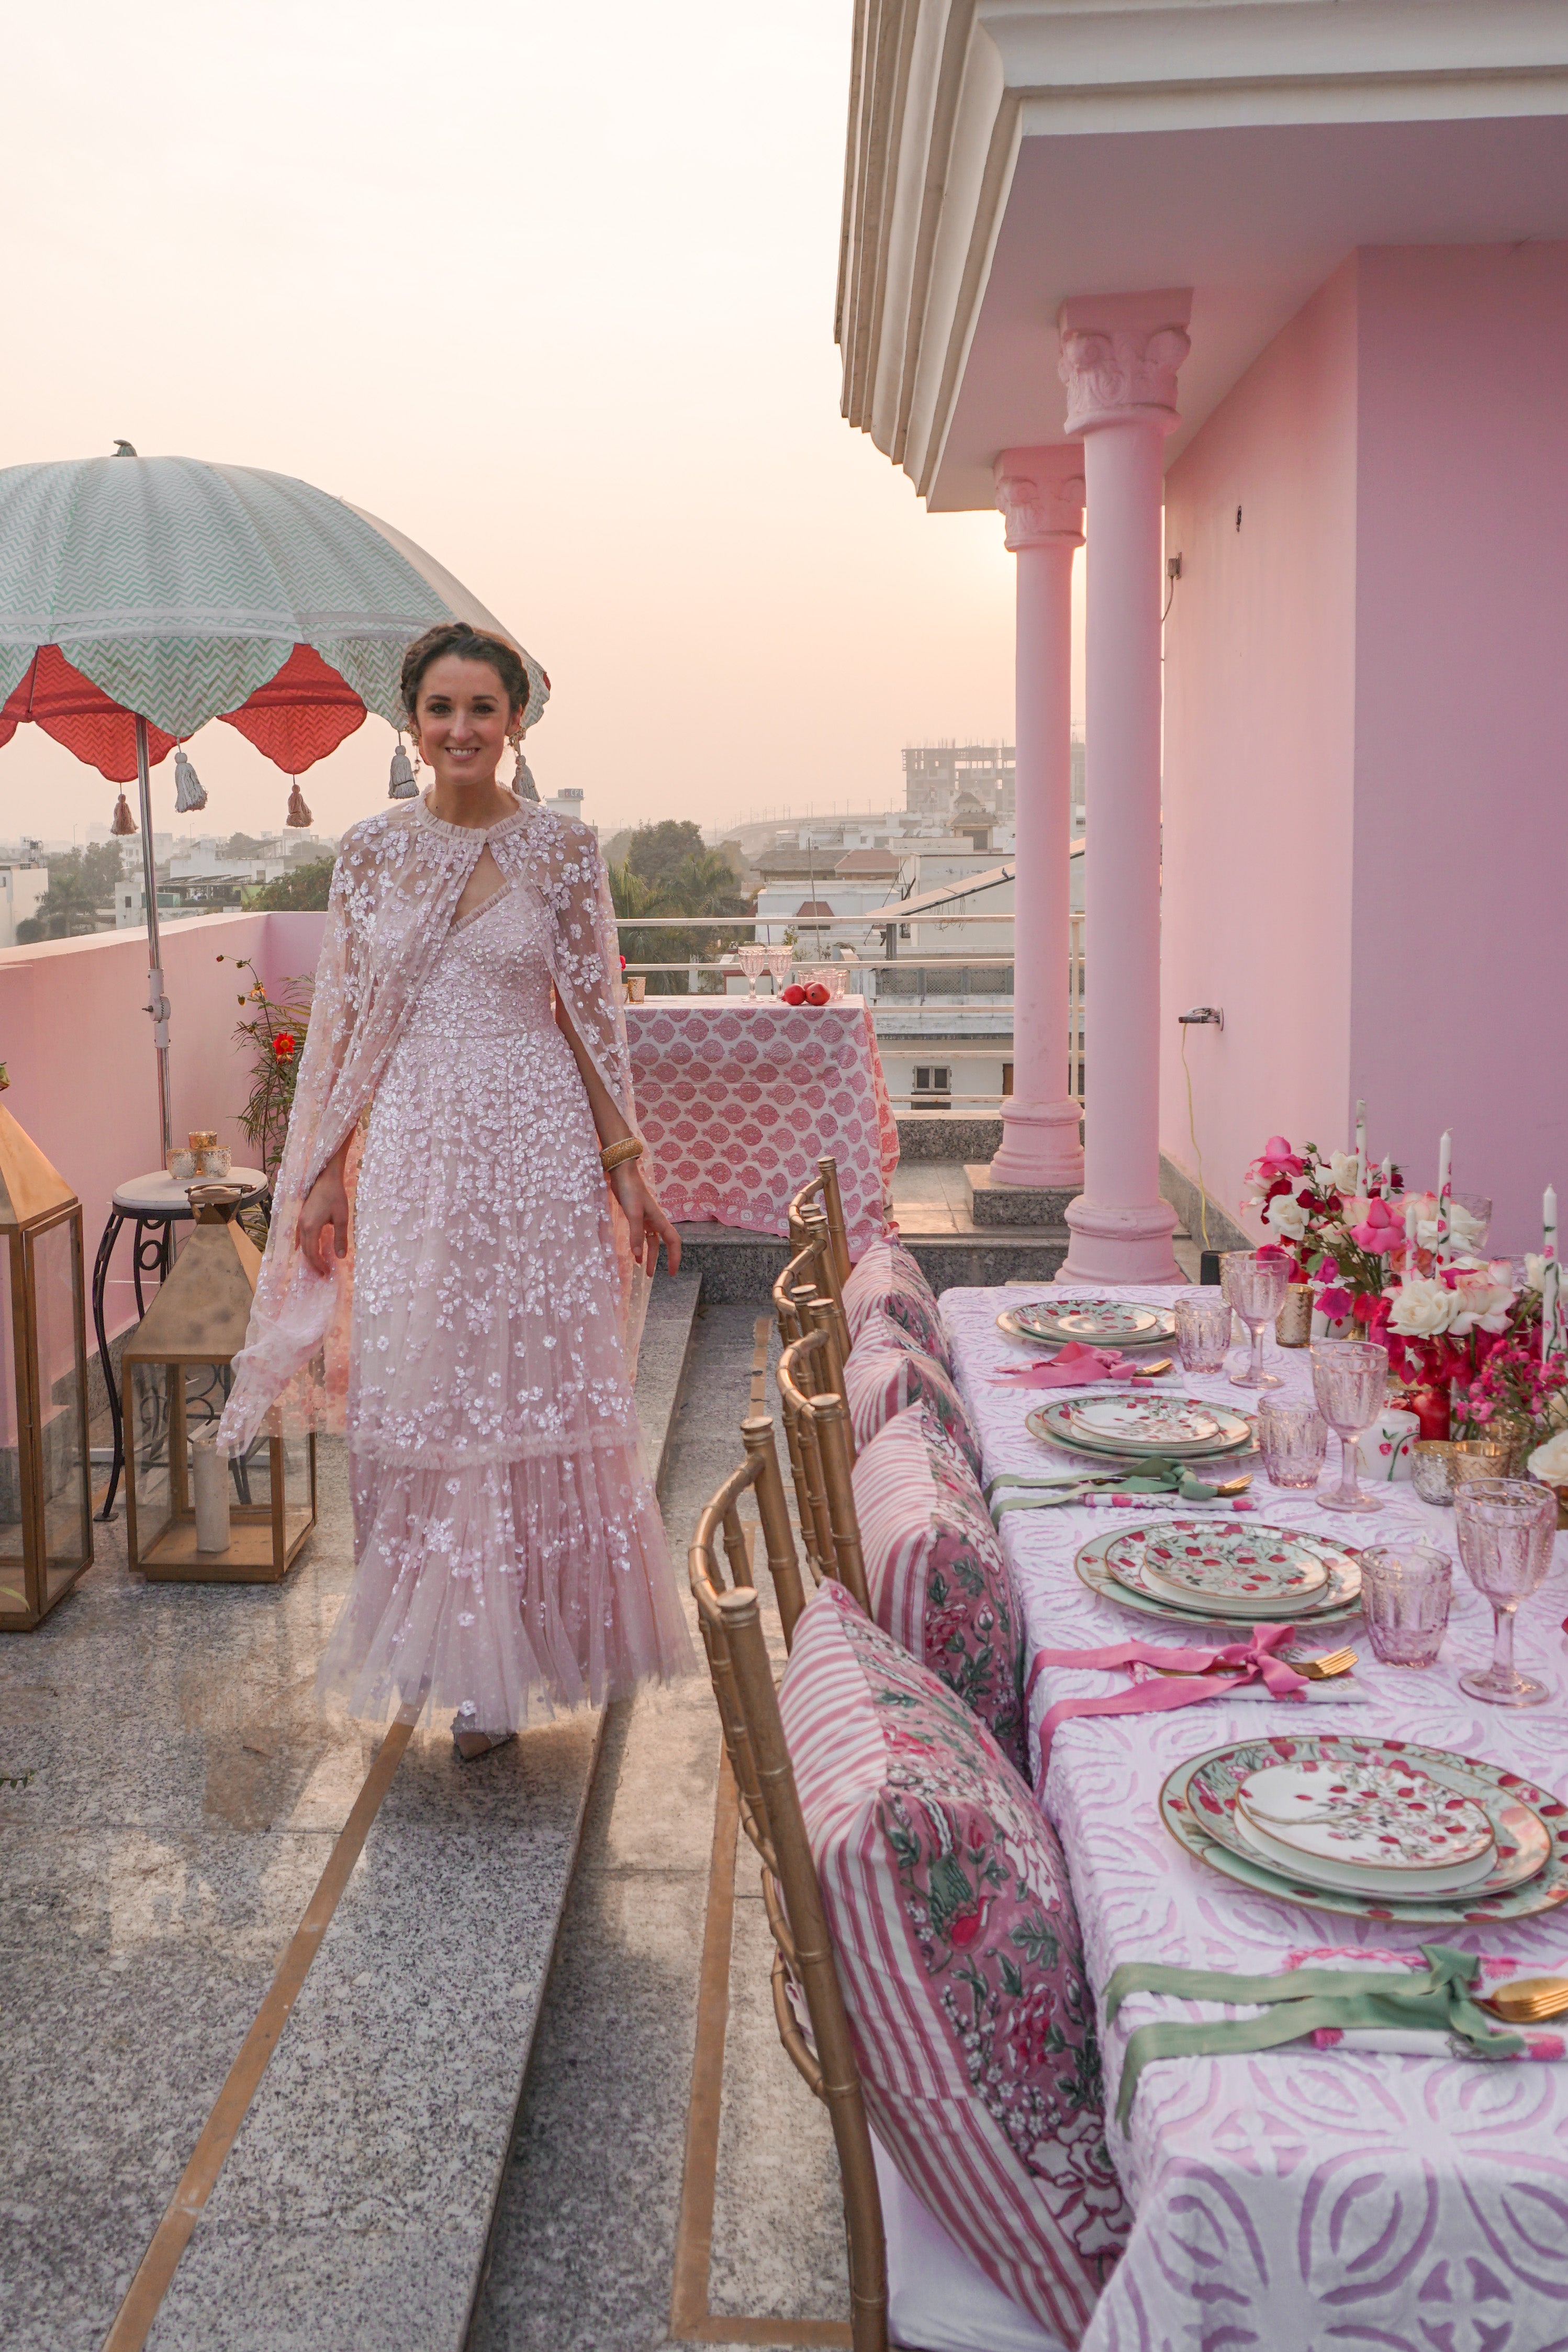 Rosanna Falconer wearing Needle & Thread pink dress and cape on terrace